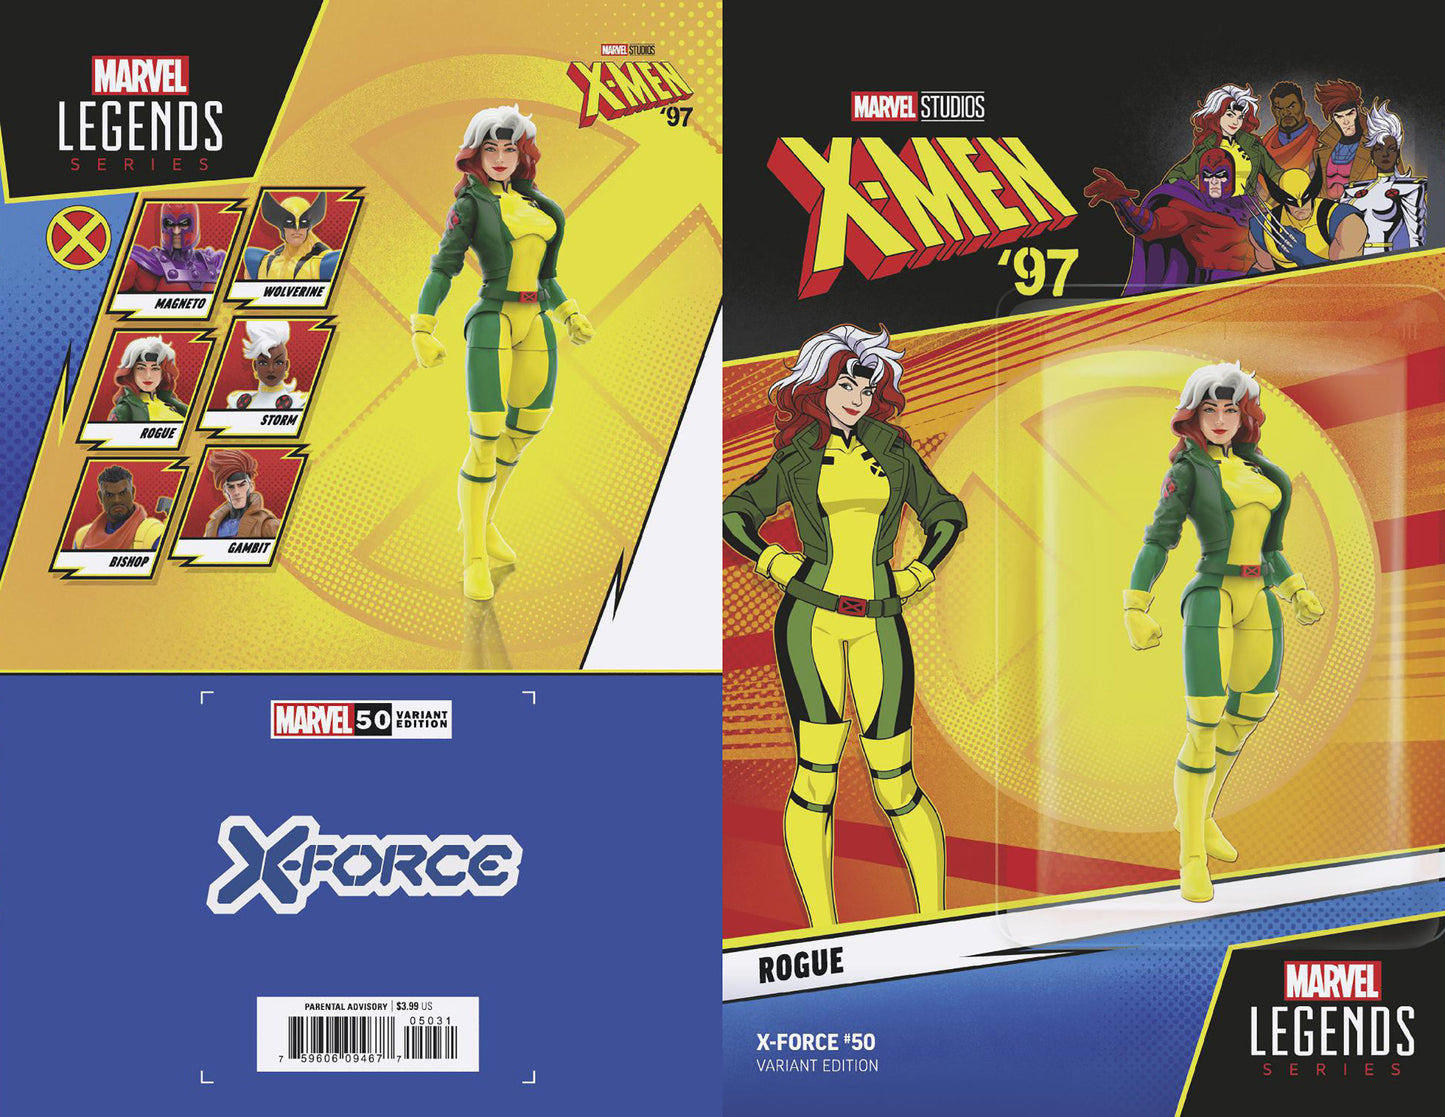 [SIGNED BY LENORE ZANN] X-FORCE #50 X-MEN 97 ROGUE ACTION FIGURE VARIANT [FALL]  (07/31/2024)